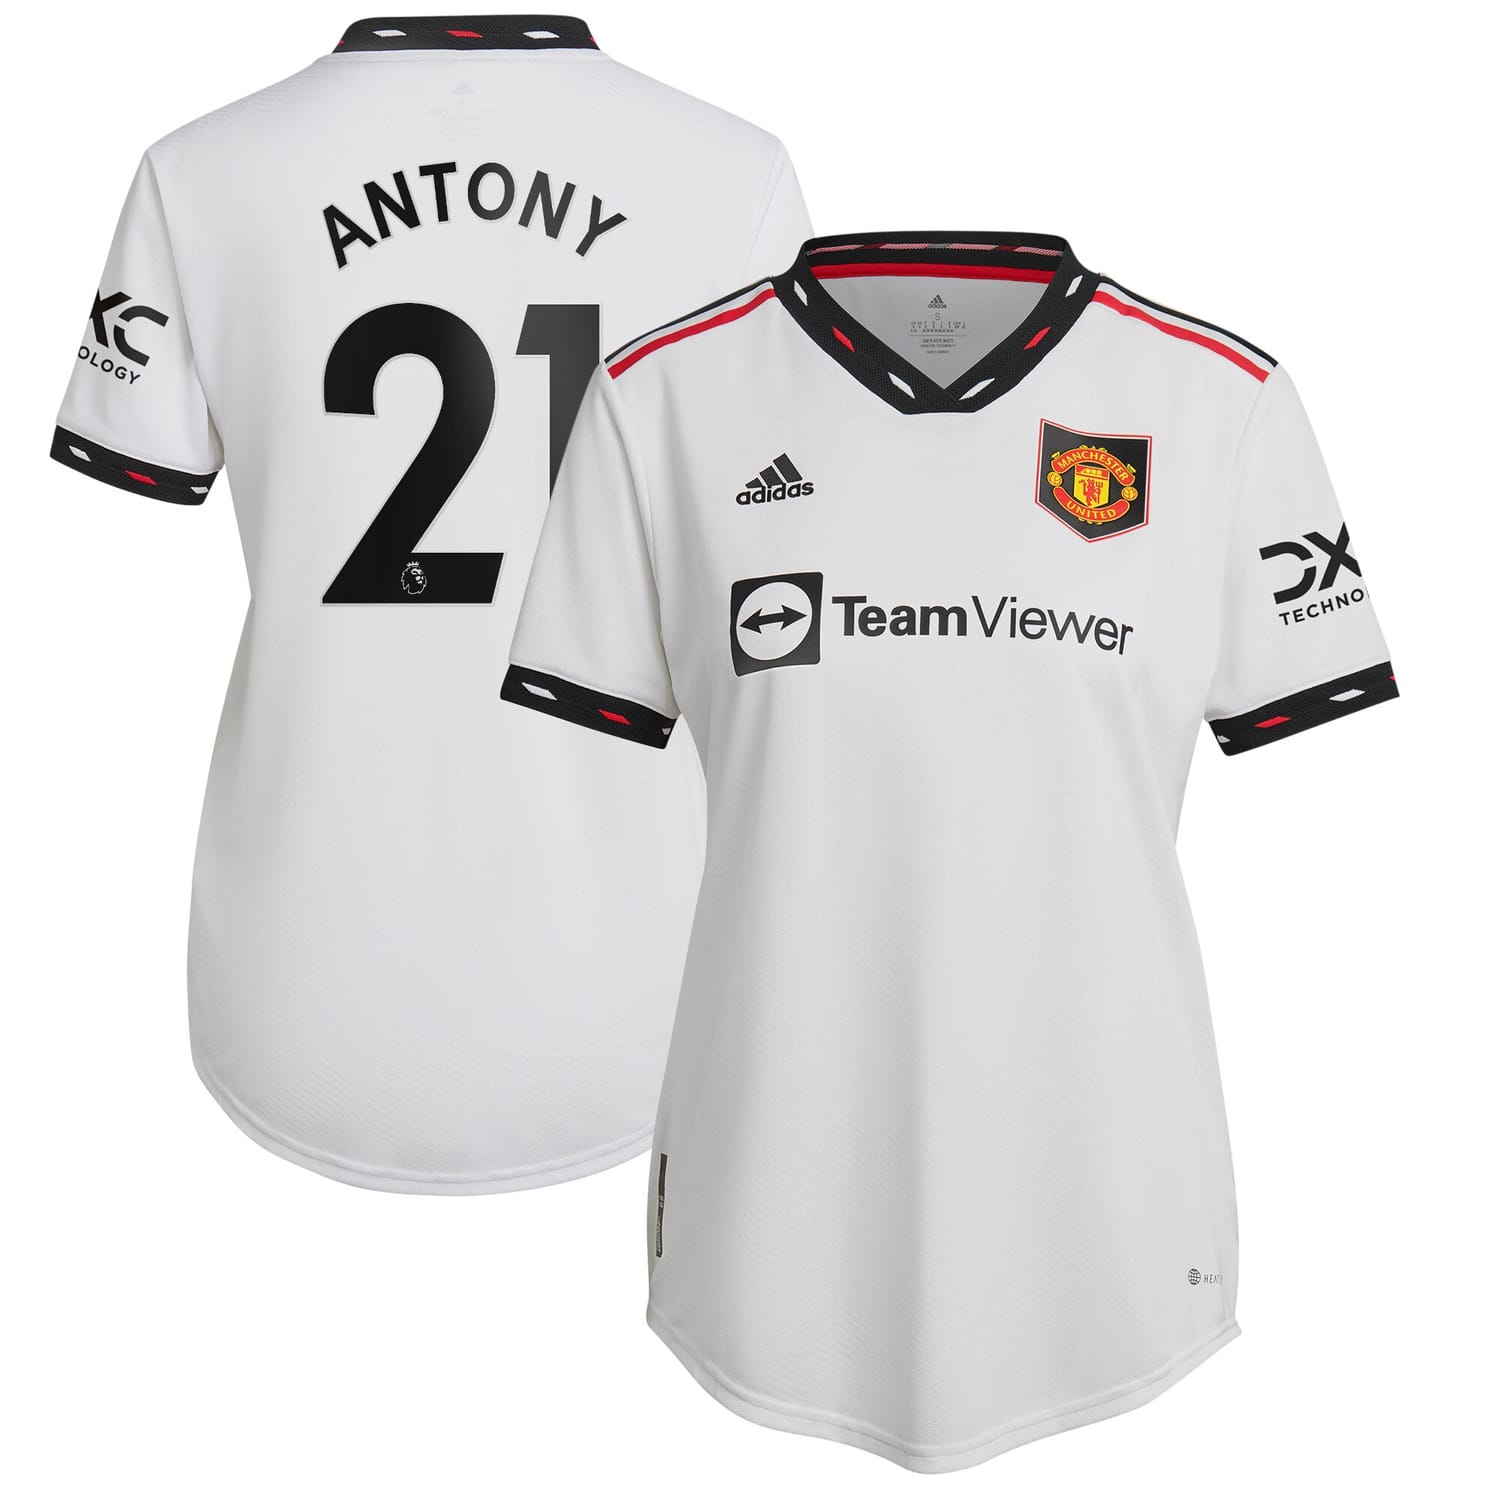 Premier League Manchester United Away Authentic Jersey Shirt 2022-23 player Antony 21 printing for Women